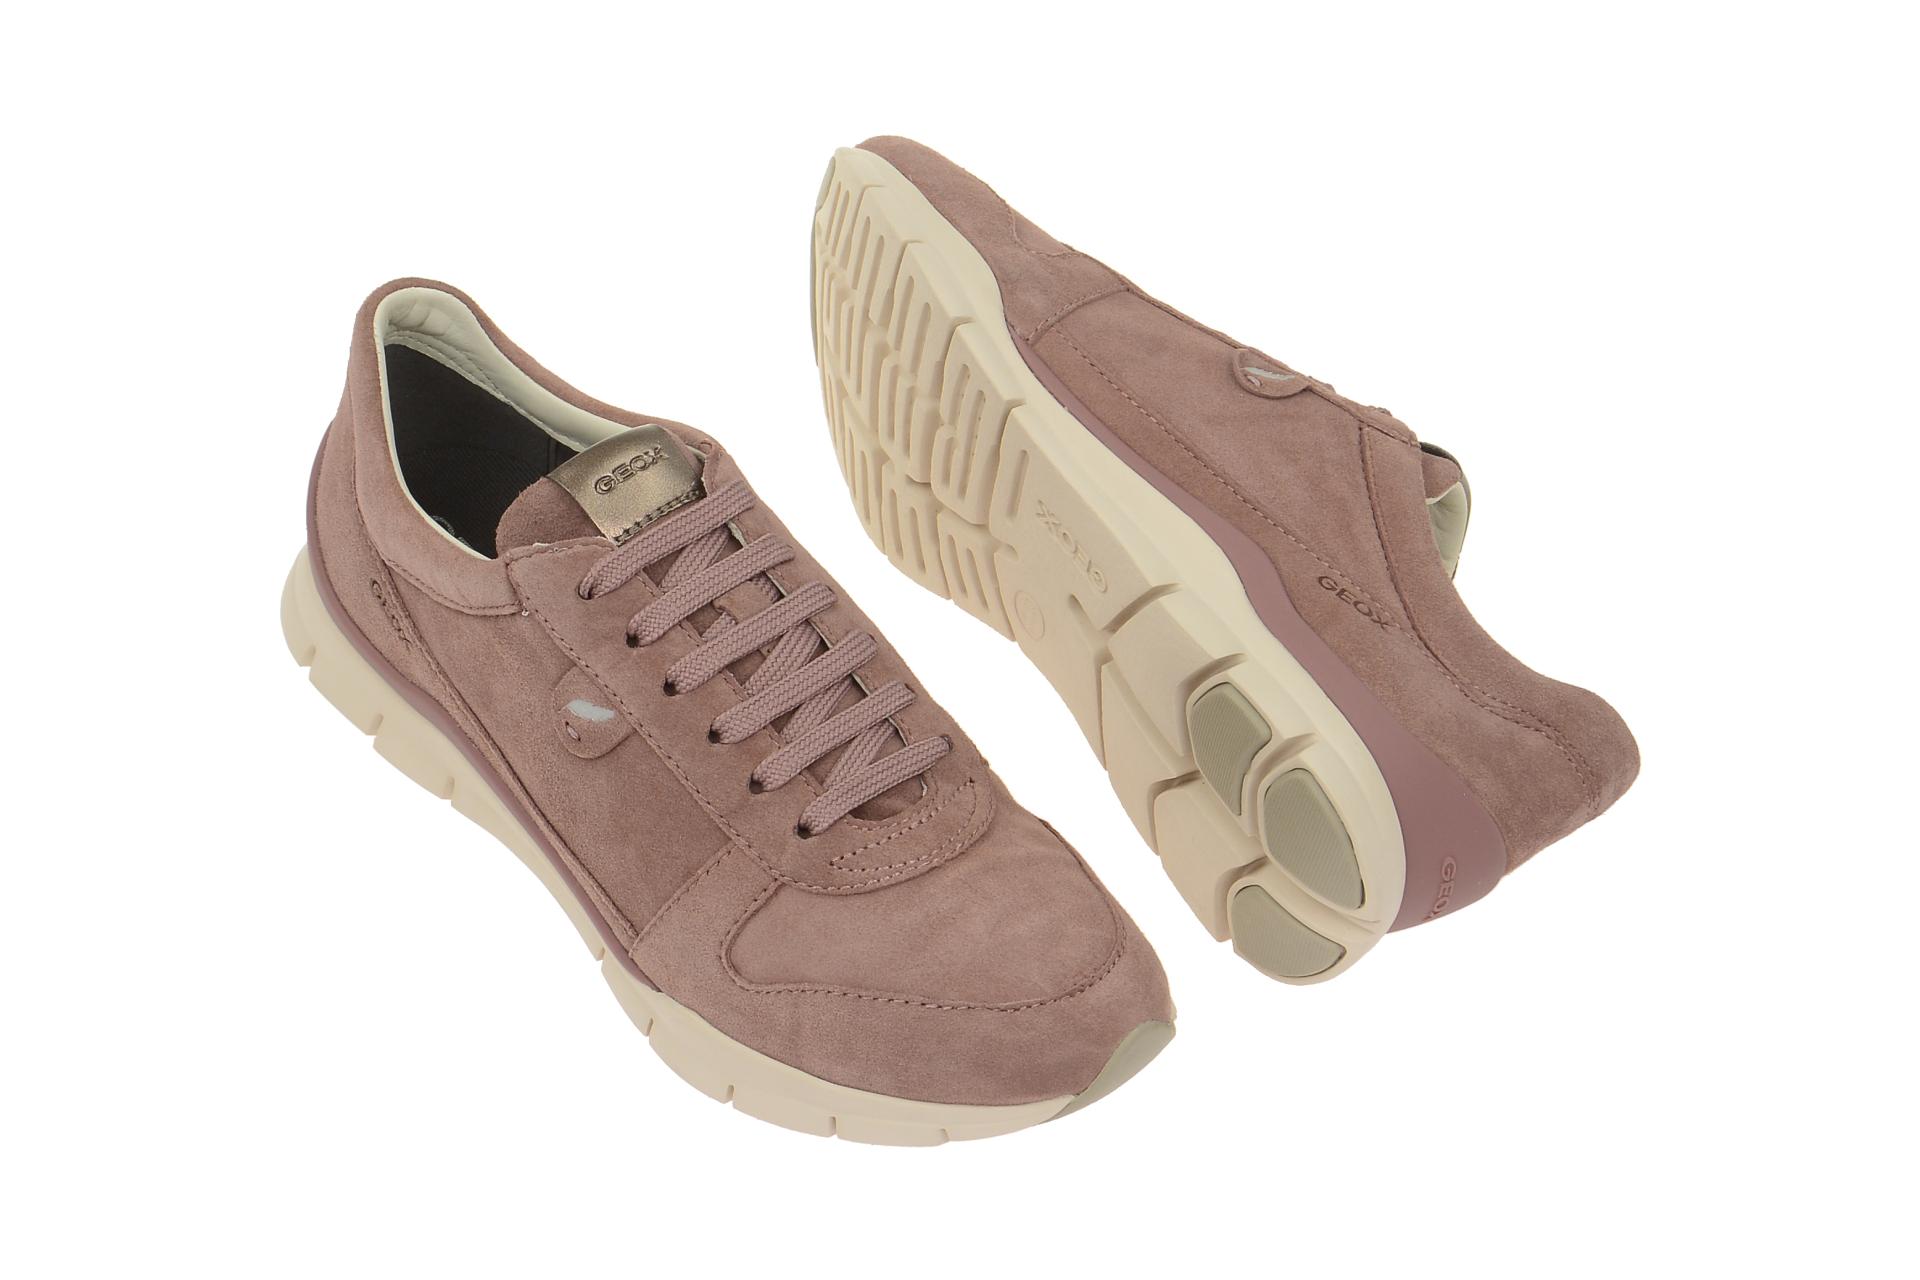 UK Geox respira sukie a sneakers ladies shoes pink in old :